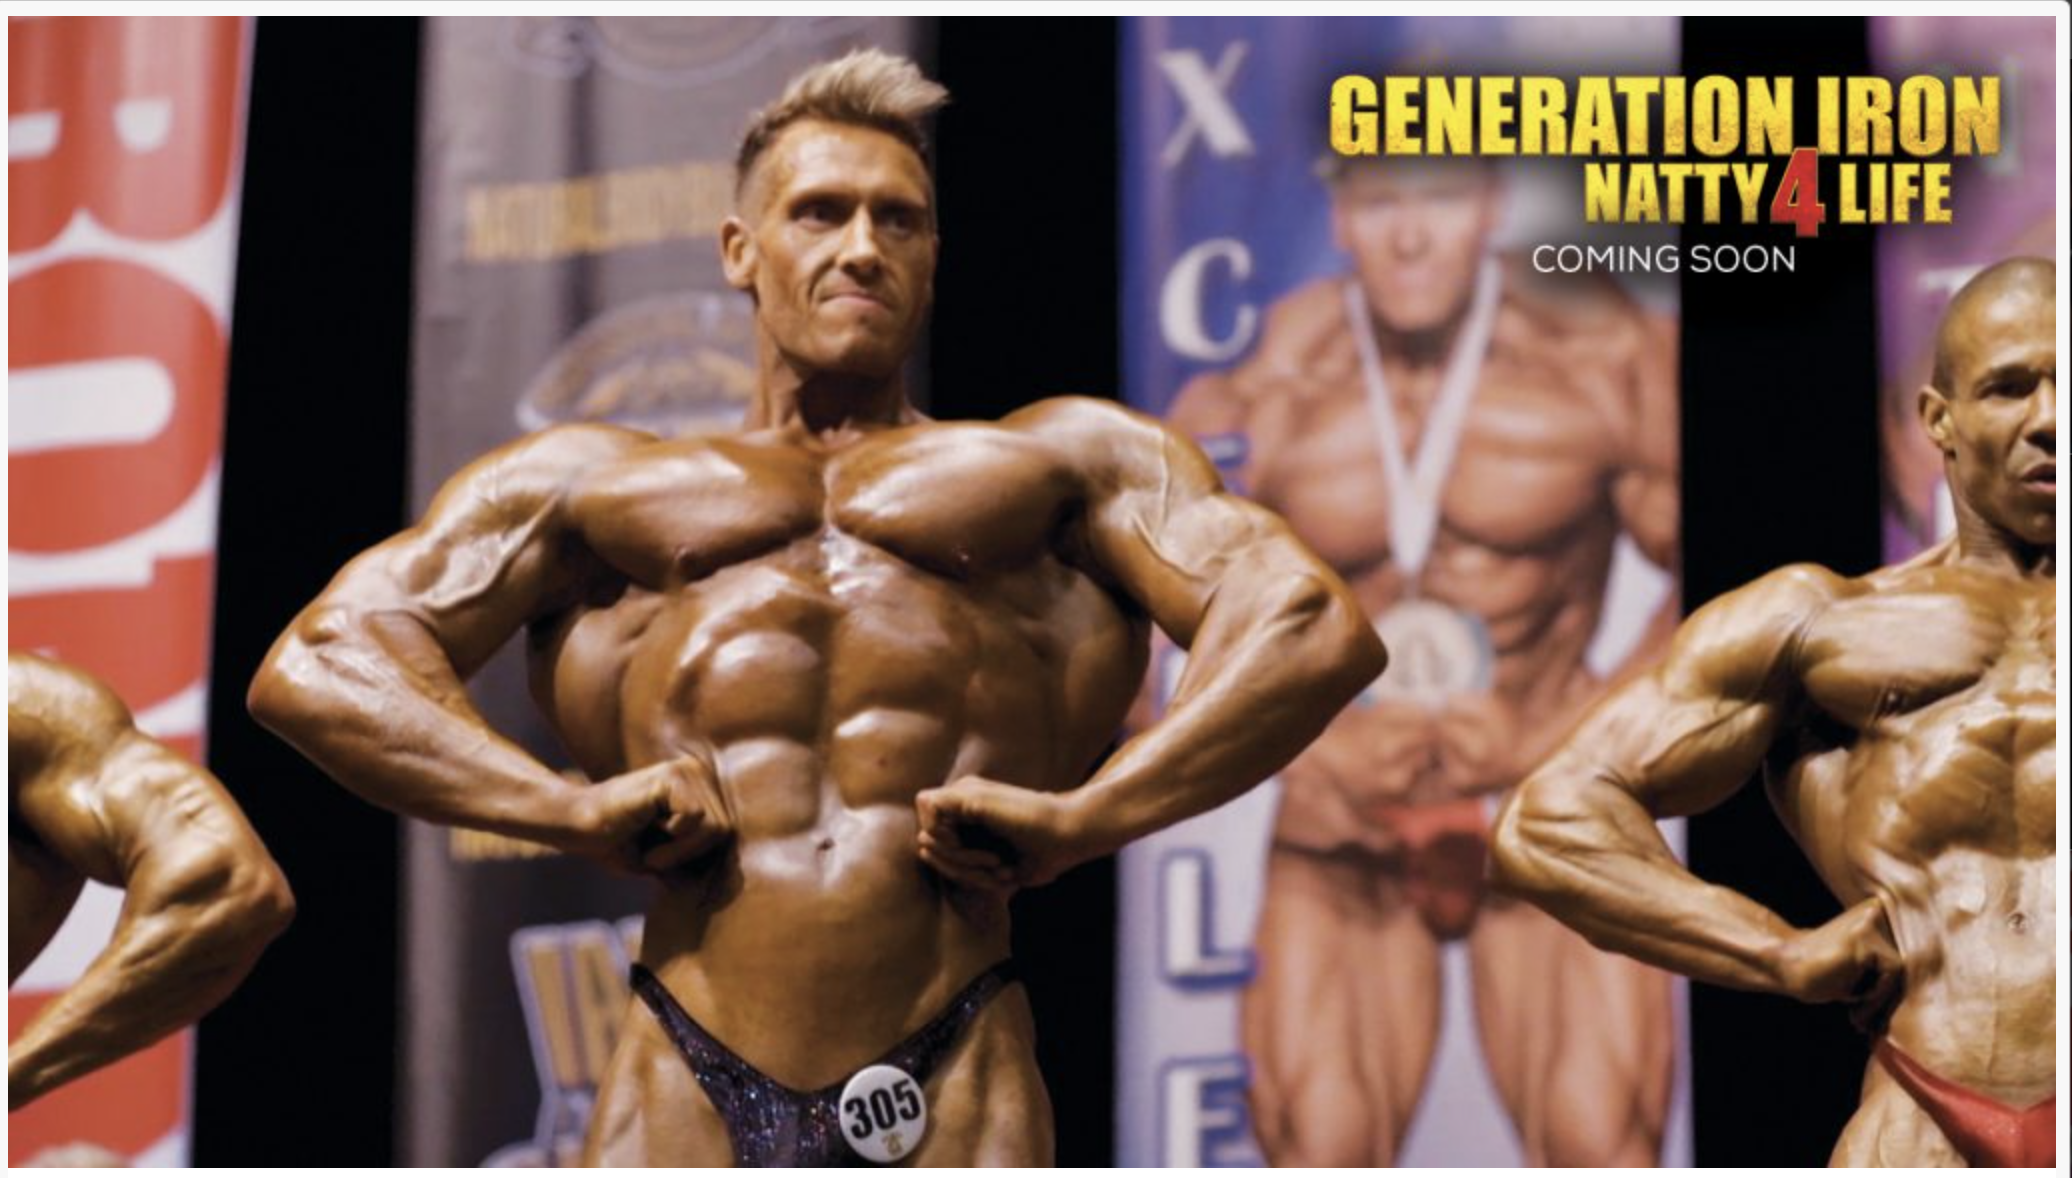 Rob Terry Is Pumped To Talk About Generation Iron: Natty 4 Life [Exclusive Interview]